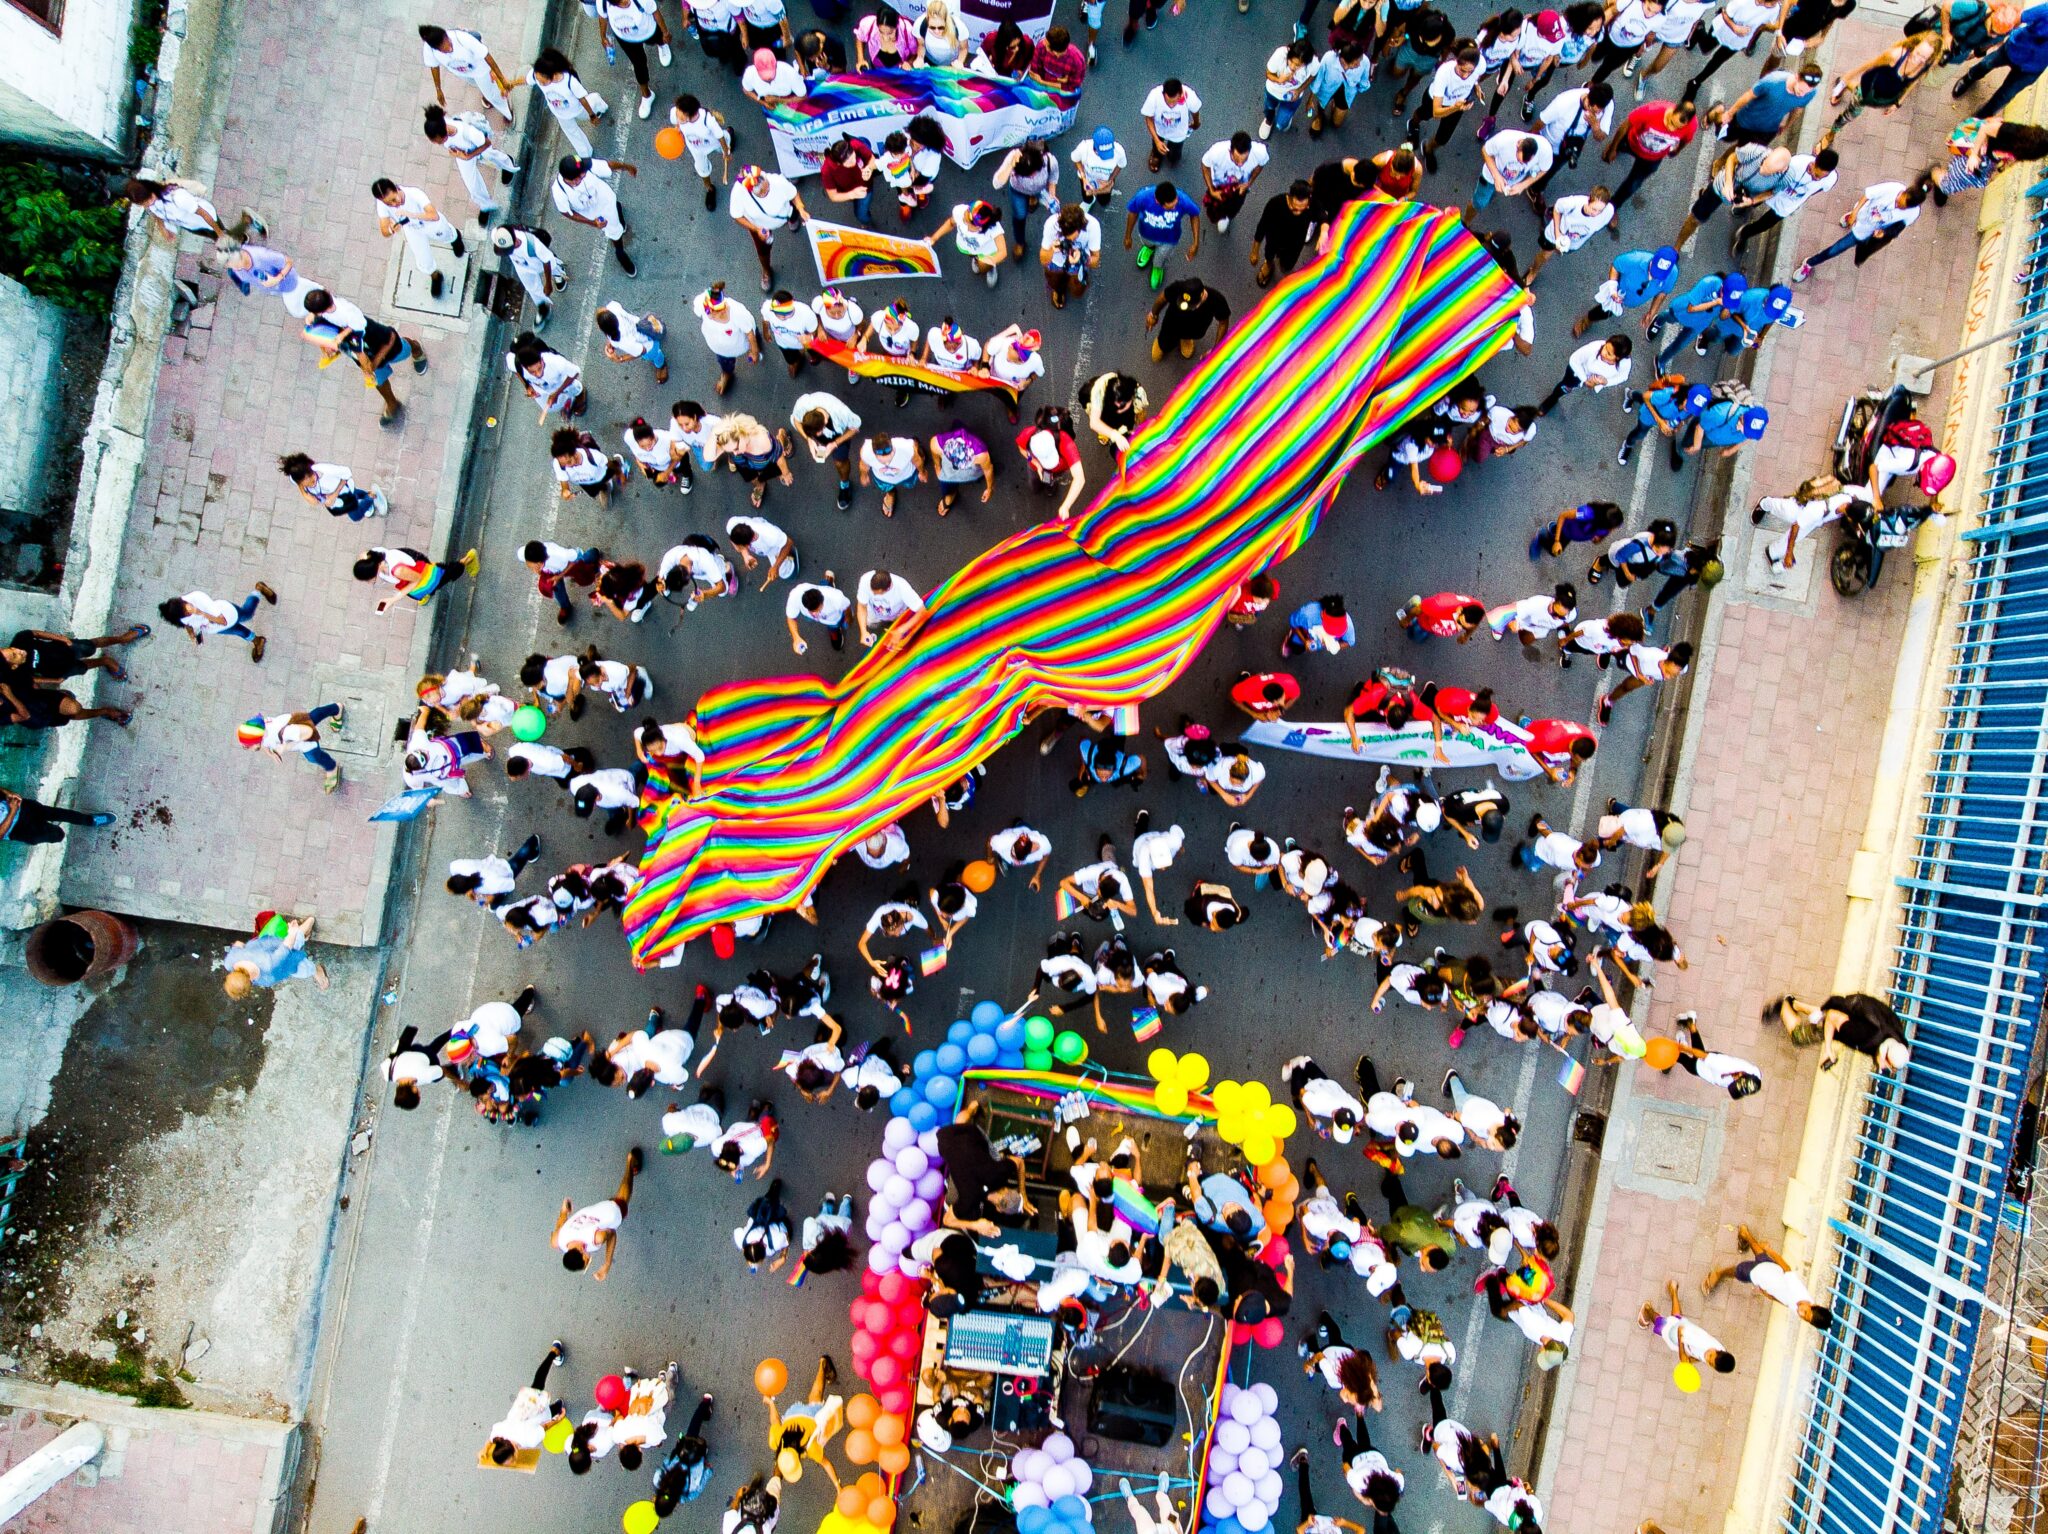 A view looking down at a Pride parade, showing all of the marchers' colors and flags.